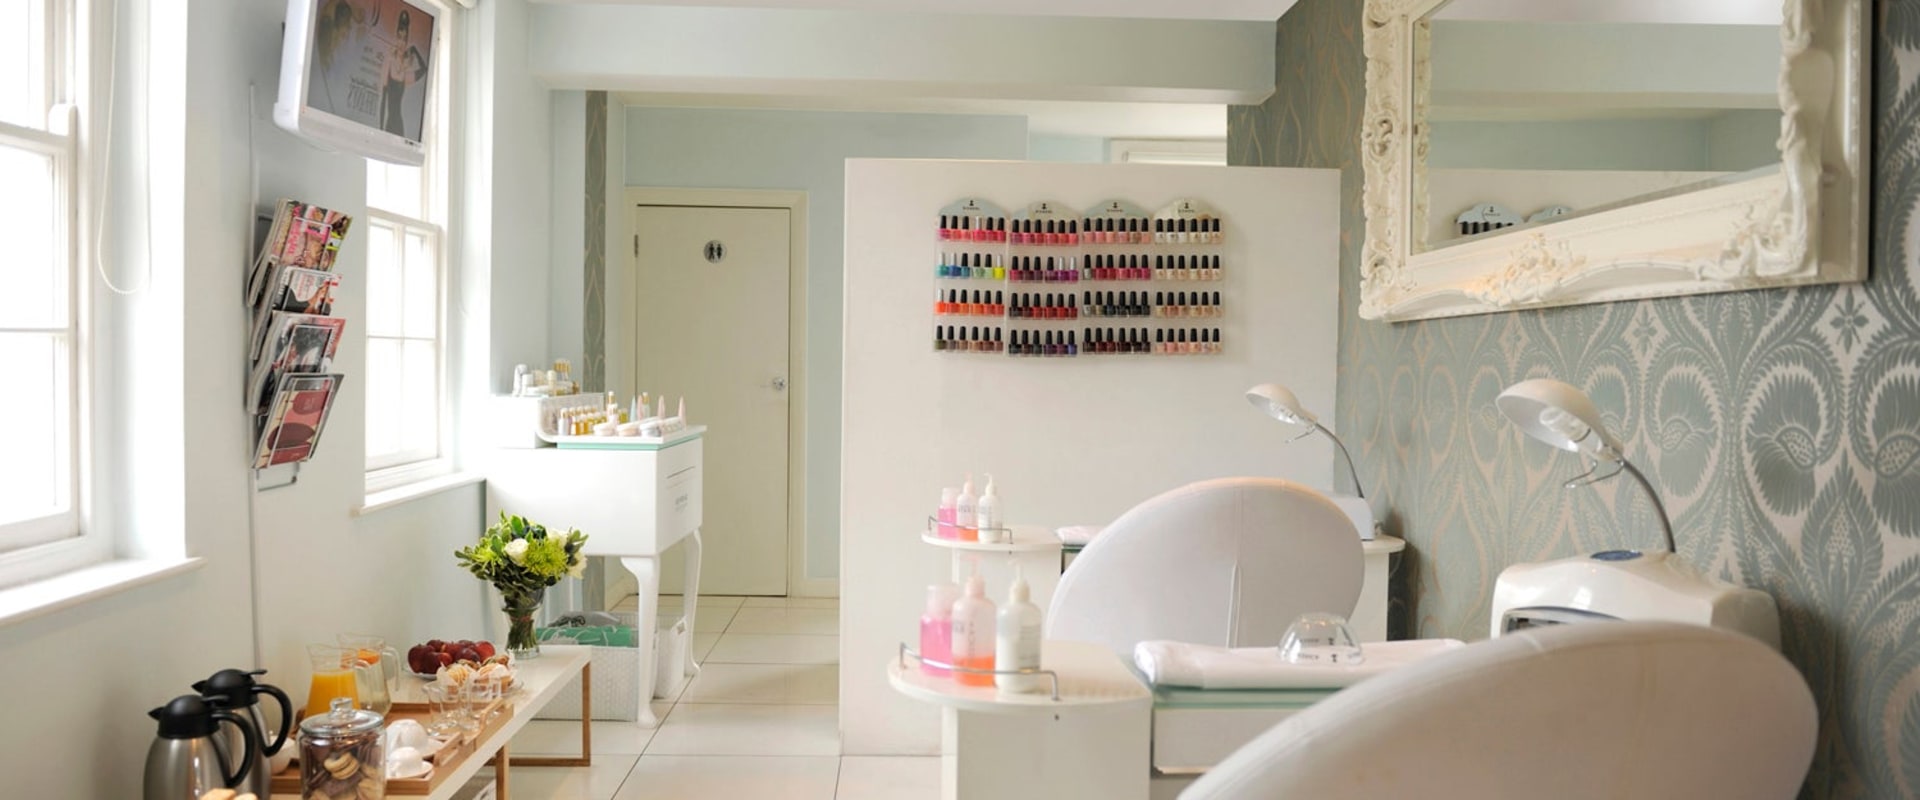 Discounts and Promotions for Beauty and Wellness Services in London